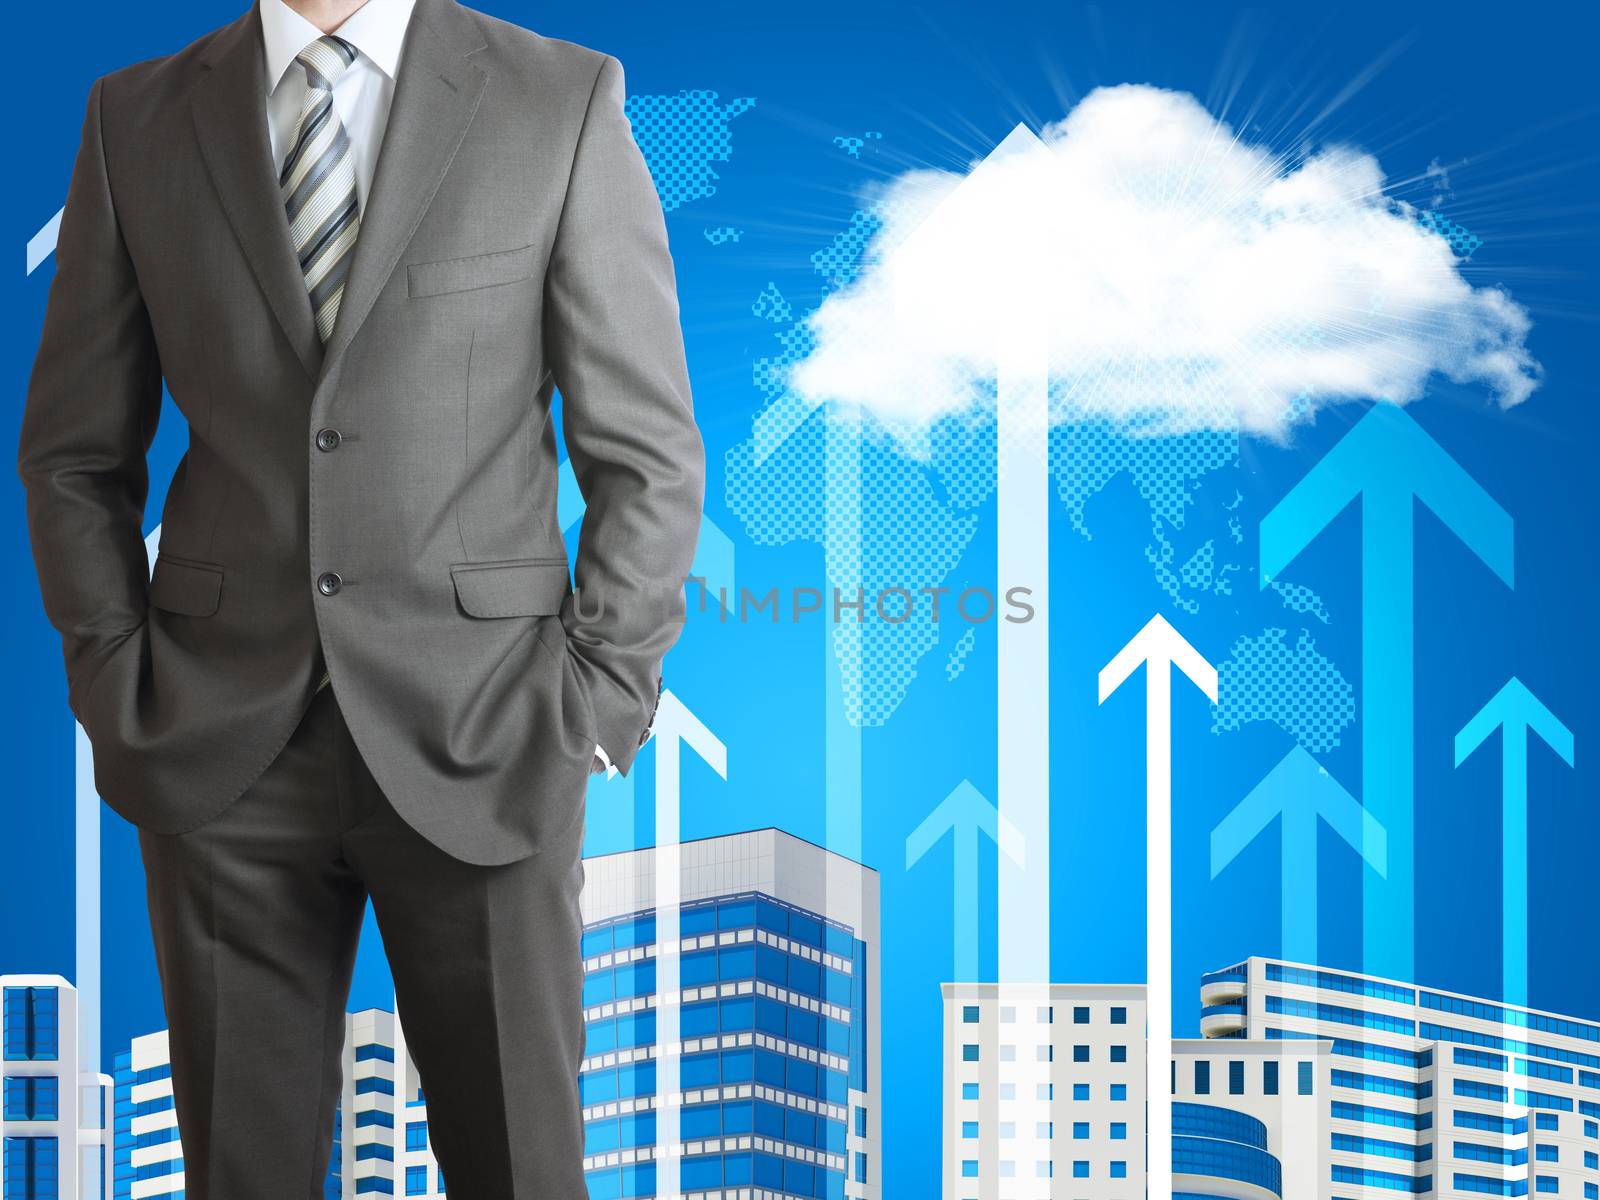 Businessman in suit. Cloud, skyscrapers and arrows as backdrop